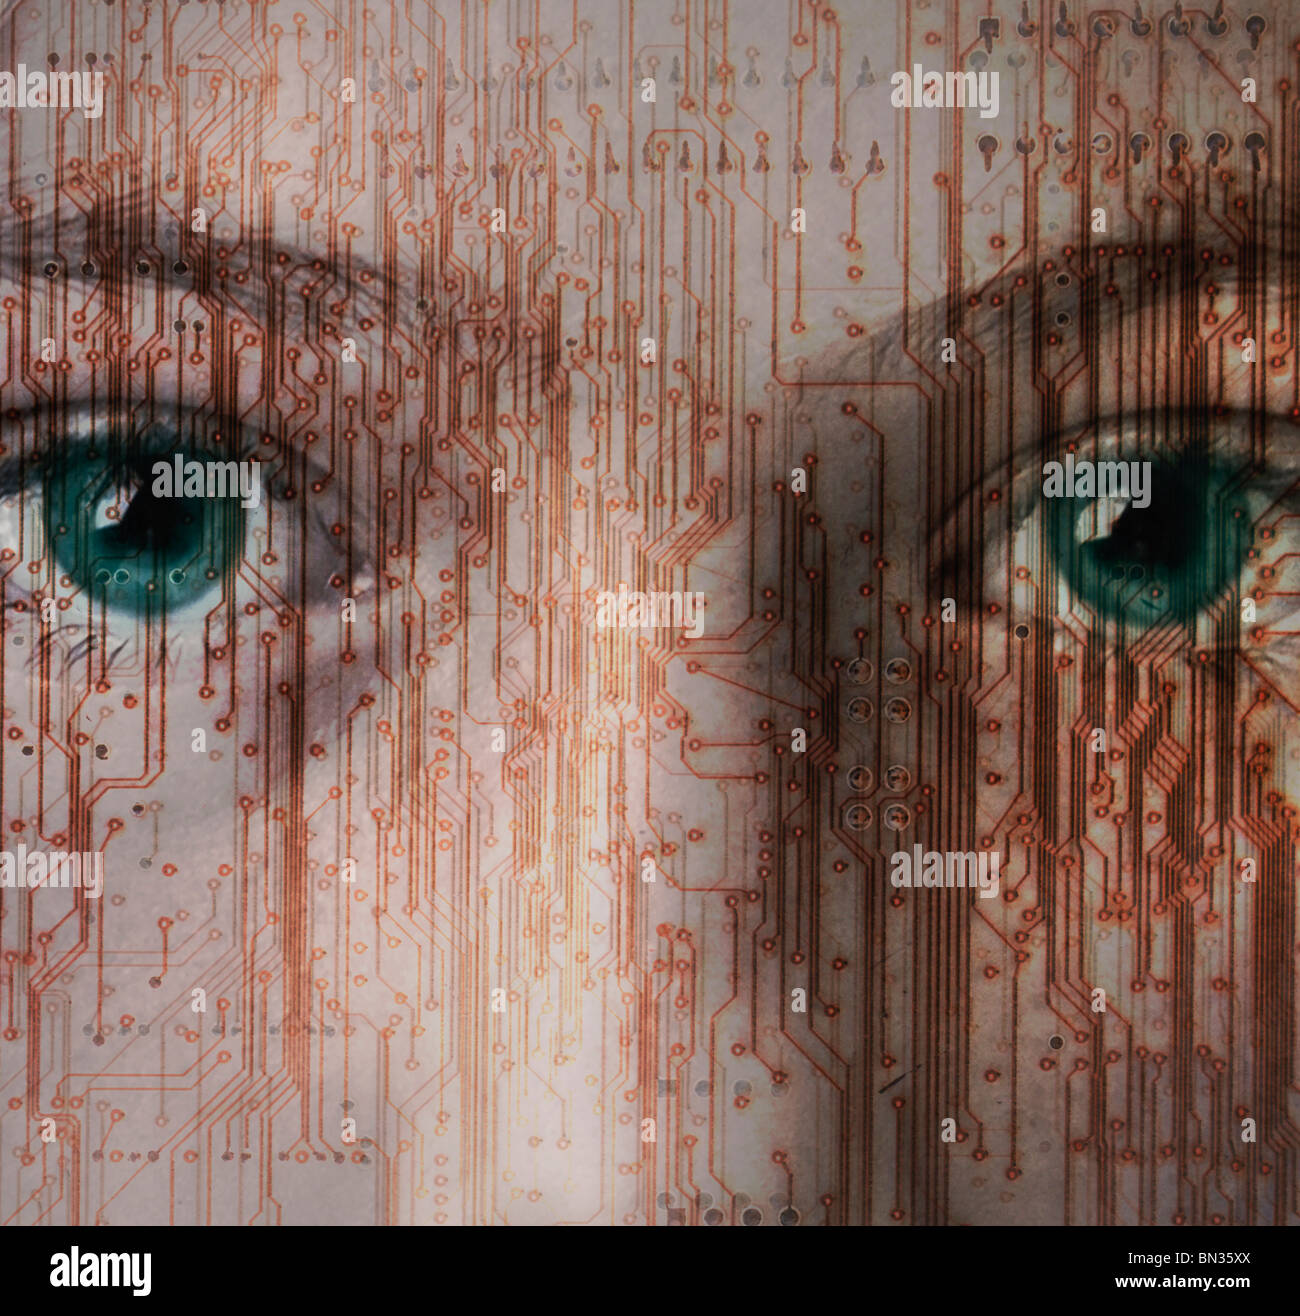 computer circuit board superimposed over a photograph of a girl Stock Photo